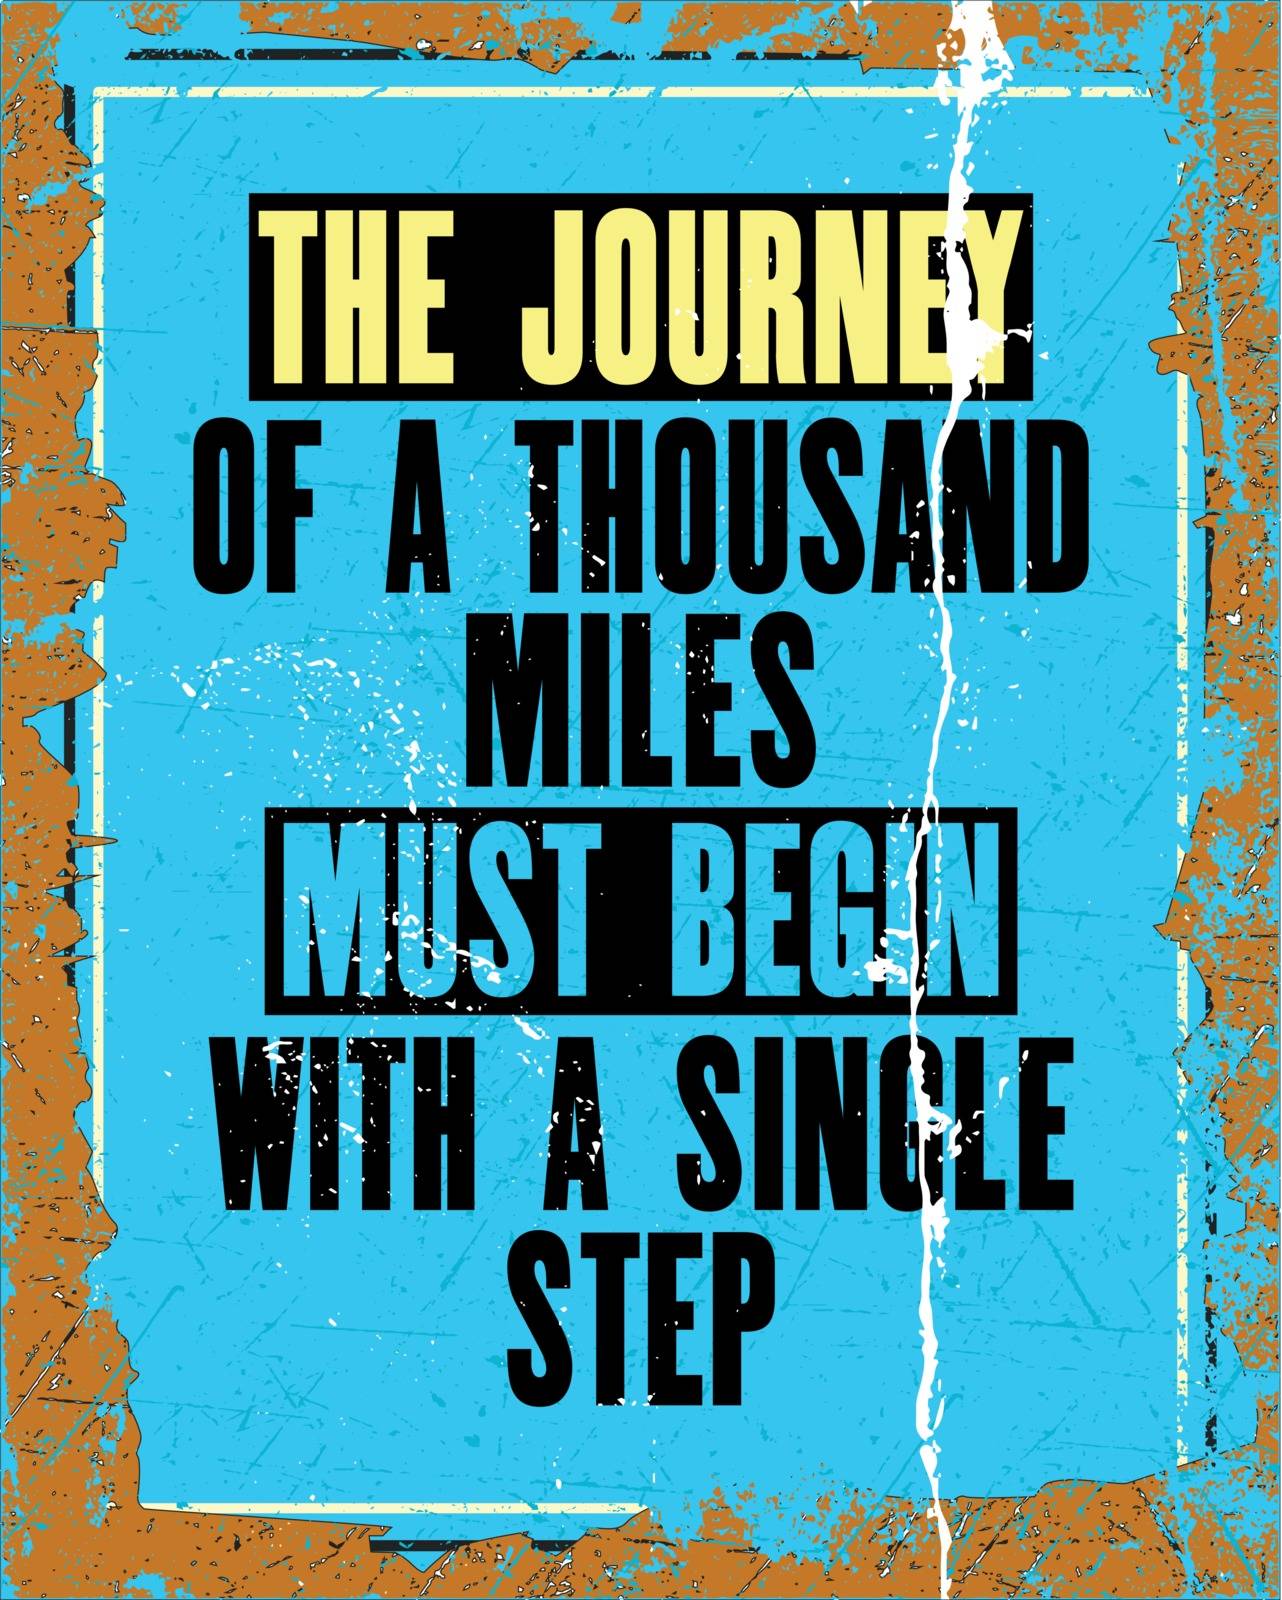 Inspiring motivation quote with text the journey of a thousand miles must begin with a single step. Vector typography poster design concept. Distressed old metal sign texture.